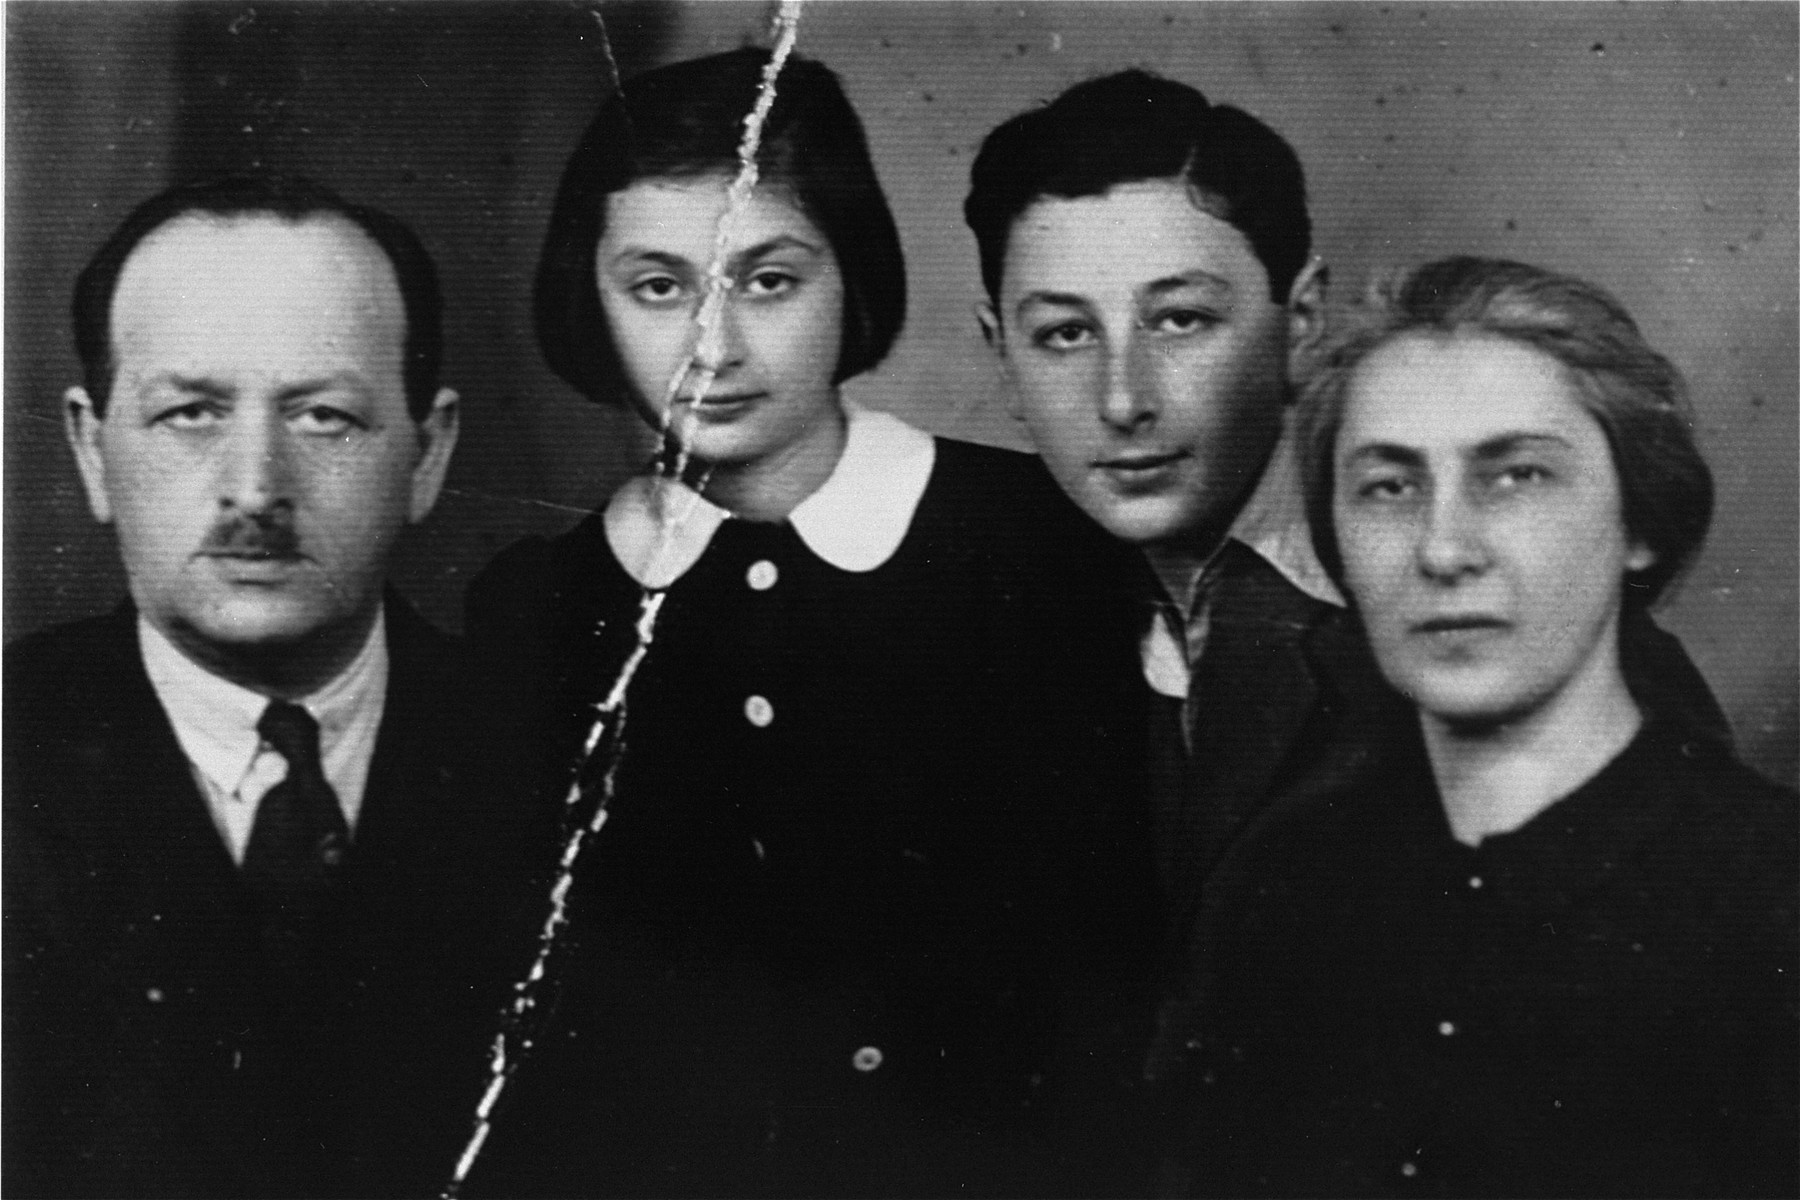 Passport photo of the Rozenman family, prepared in the Warsaw ghetto for a possiblity of an escape.  

Pictured from right to left: Regina Renia, the donor's mother; Ryszard, donor's brother; Bianka, the donor and Pawel Rozenman, donor's father.  Bianka is the only survivor.